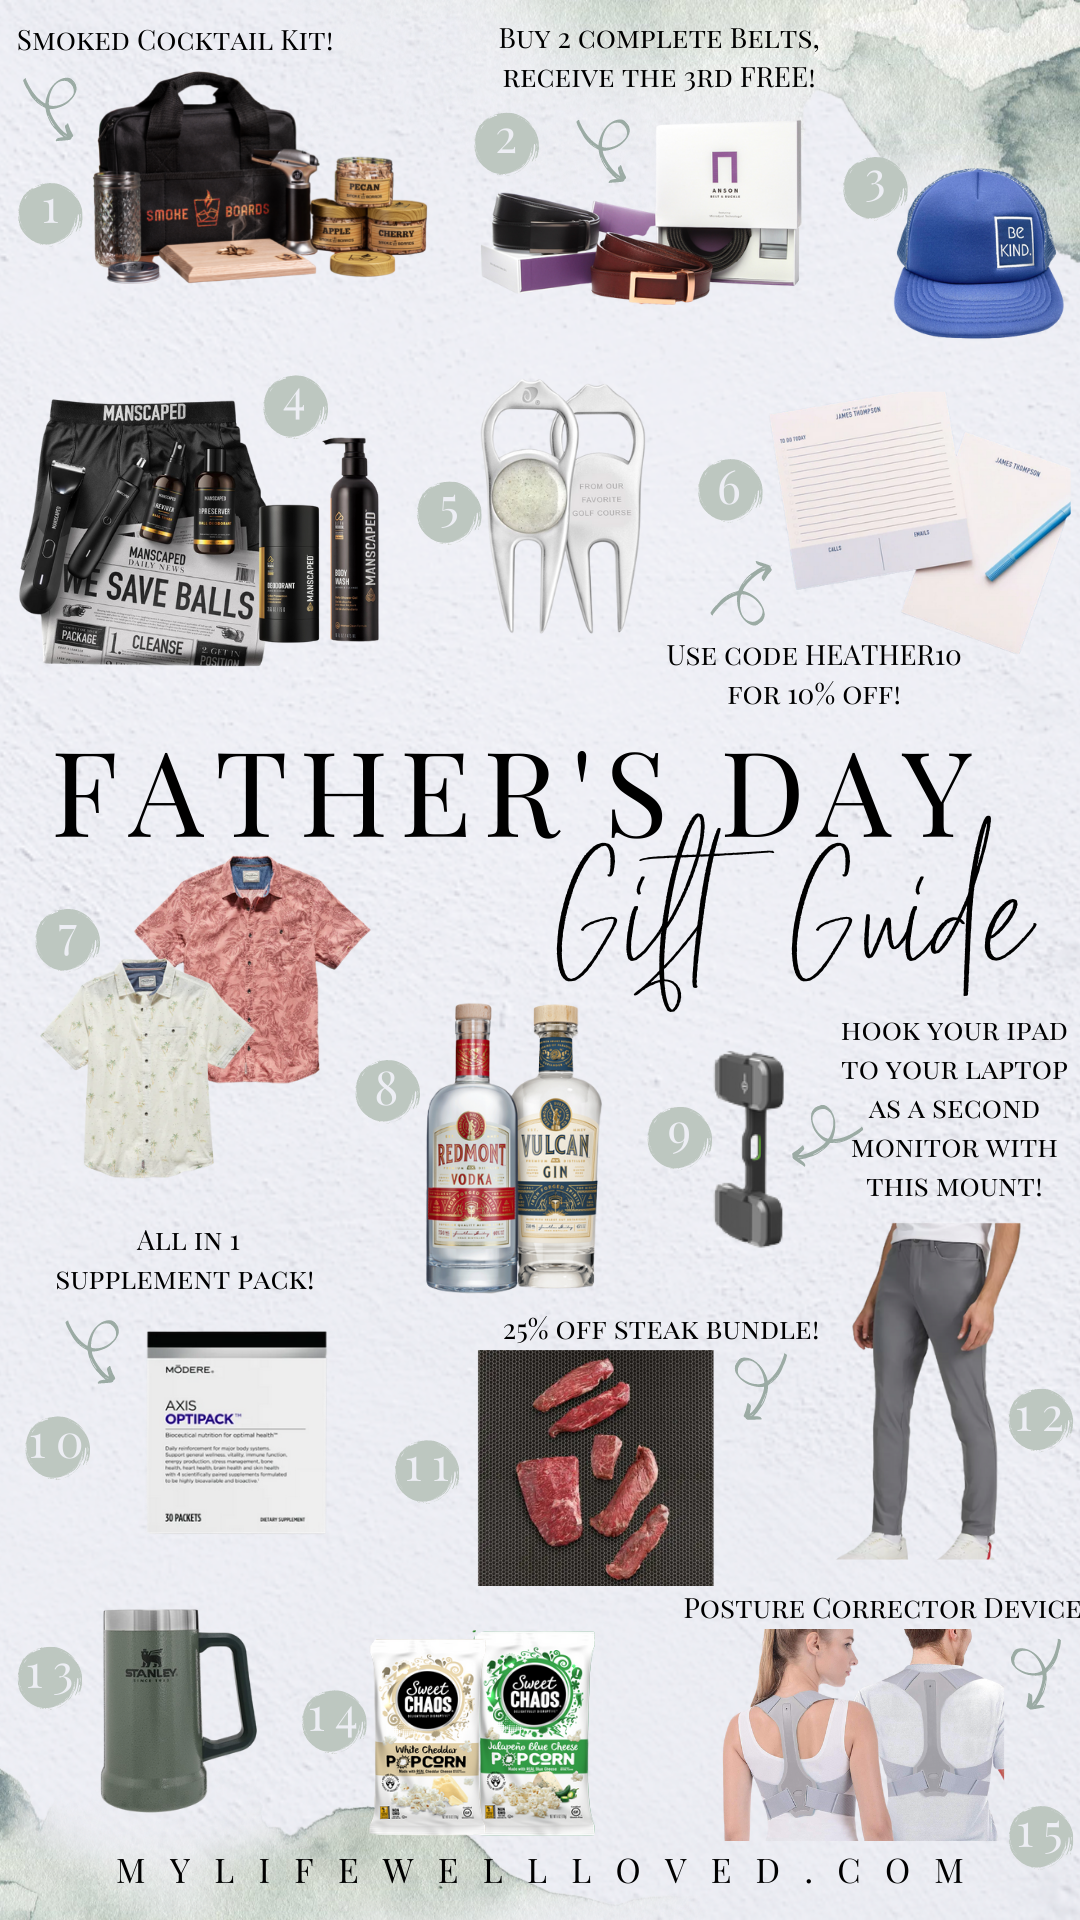 Mom + lifestyle blogger, My Life Well Loved, shares her dad of boys gifts for Father's Day! Click NOW to see what ideas she came up with!